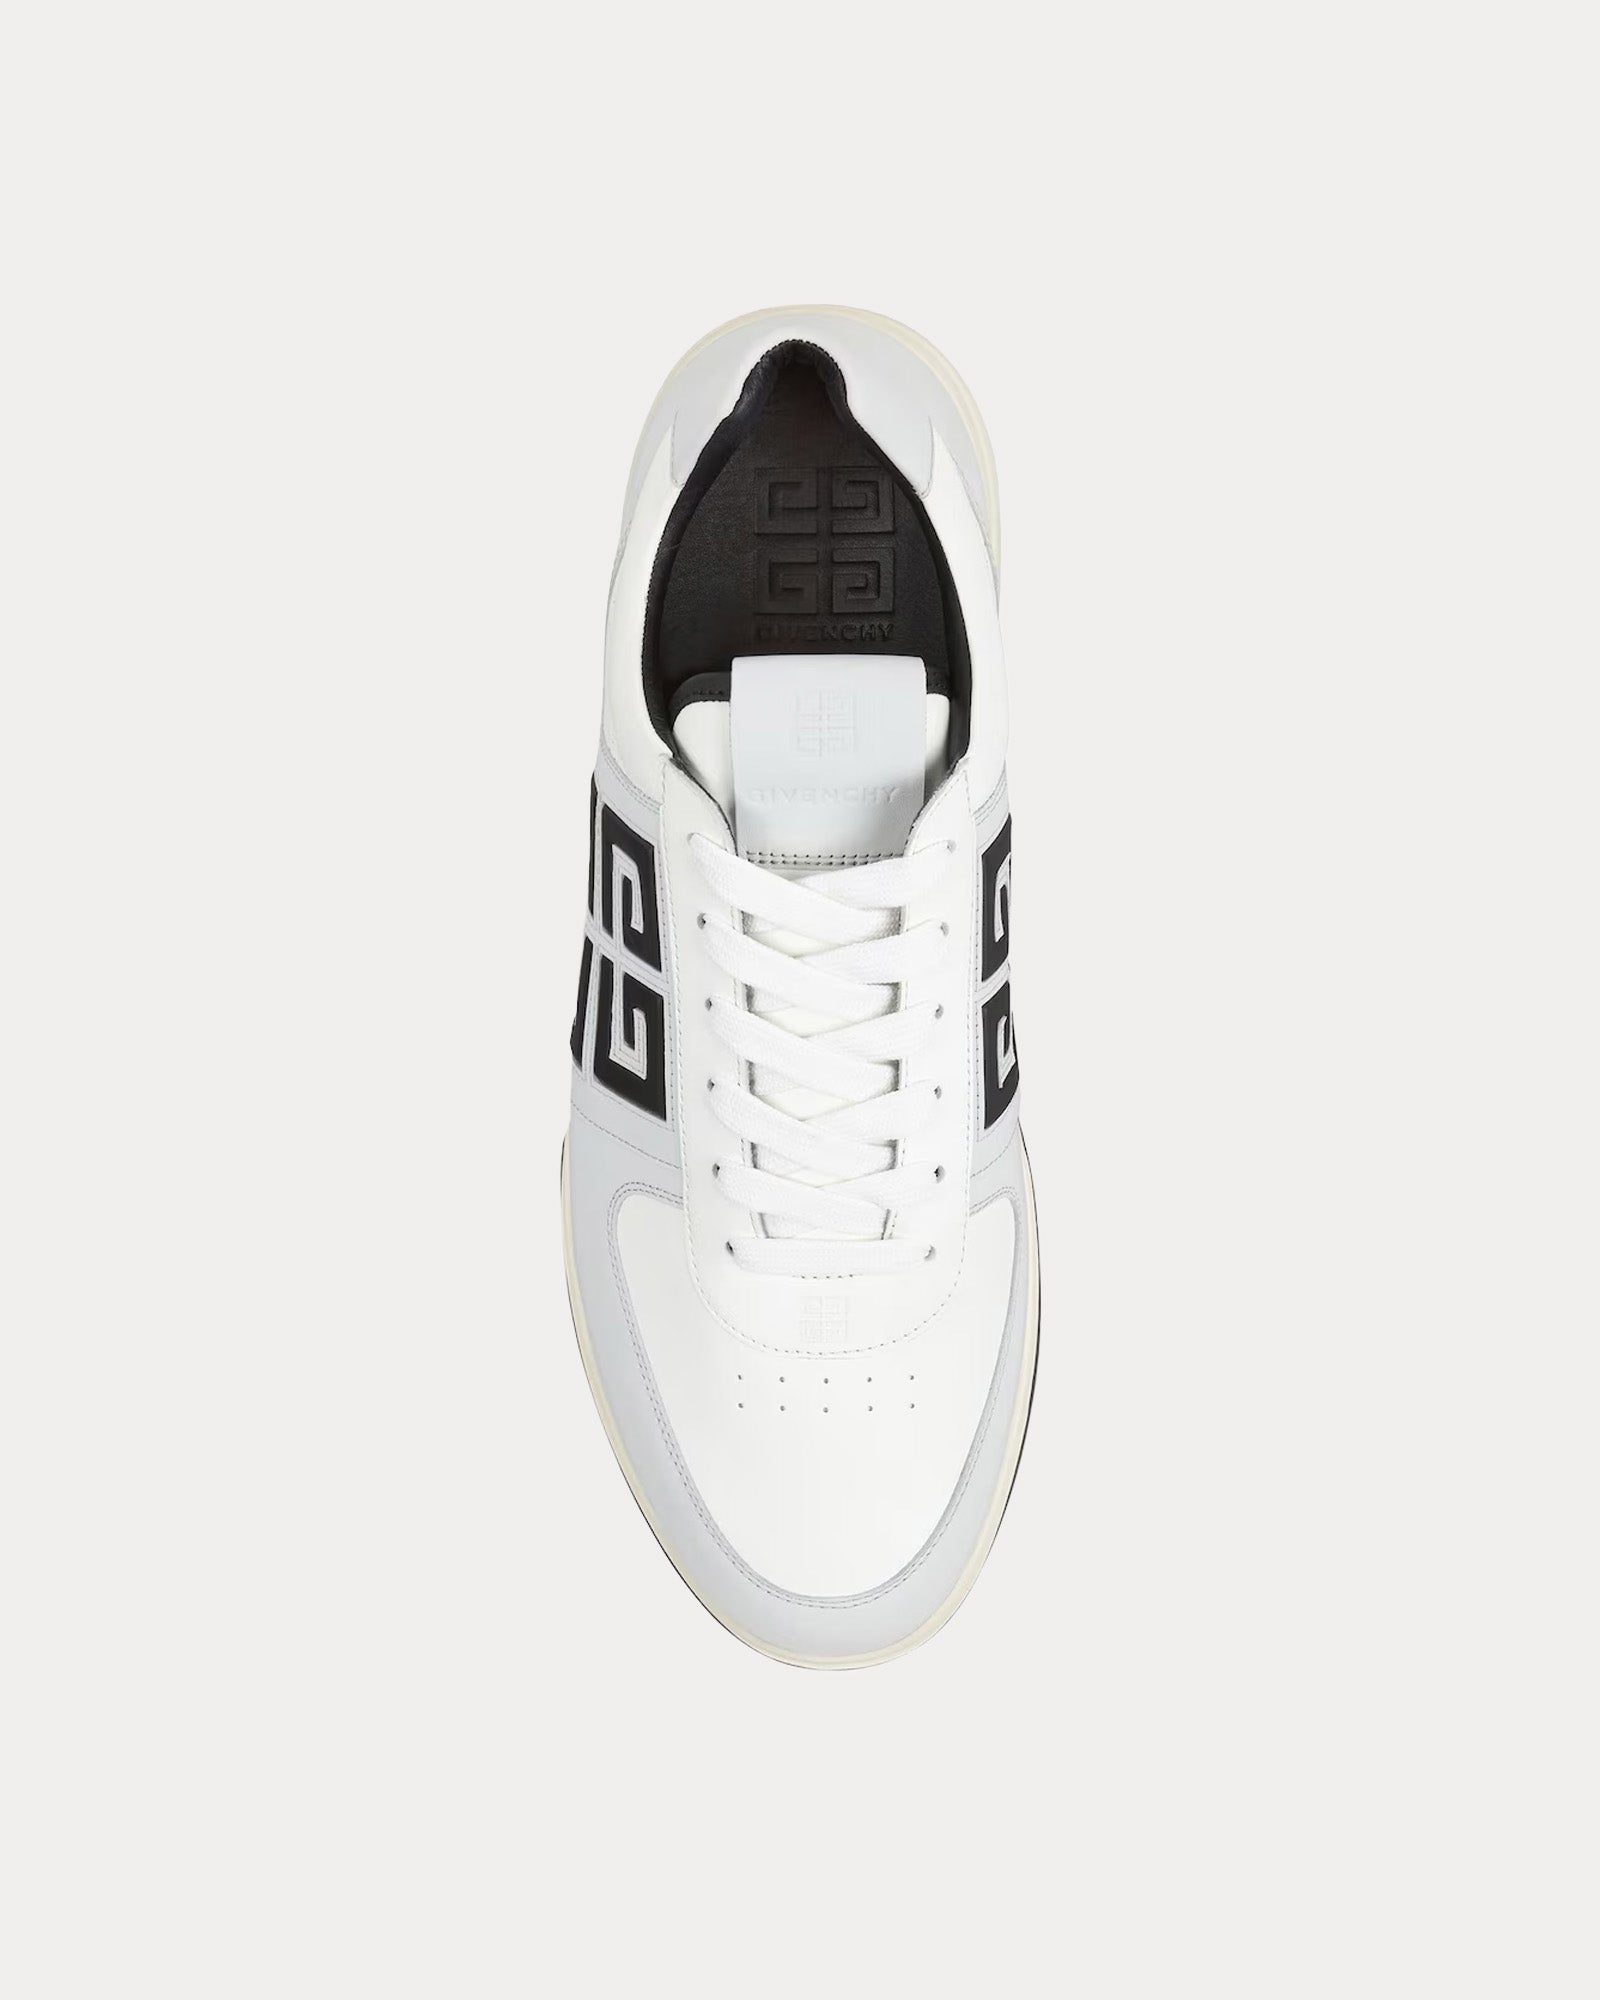 Givenchy - G4 Leather & Perforated Leather Grey / Black Low Top Sneakers